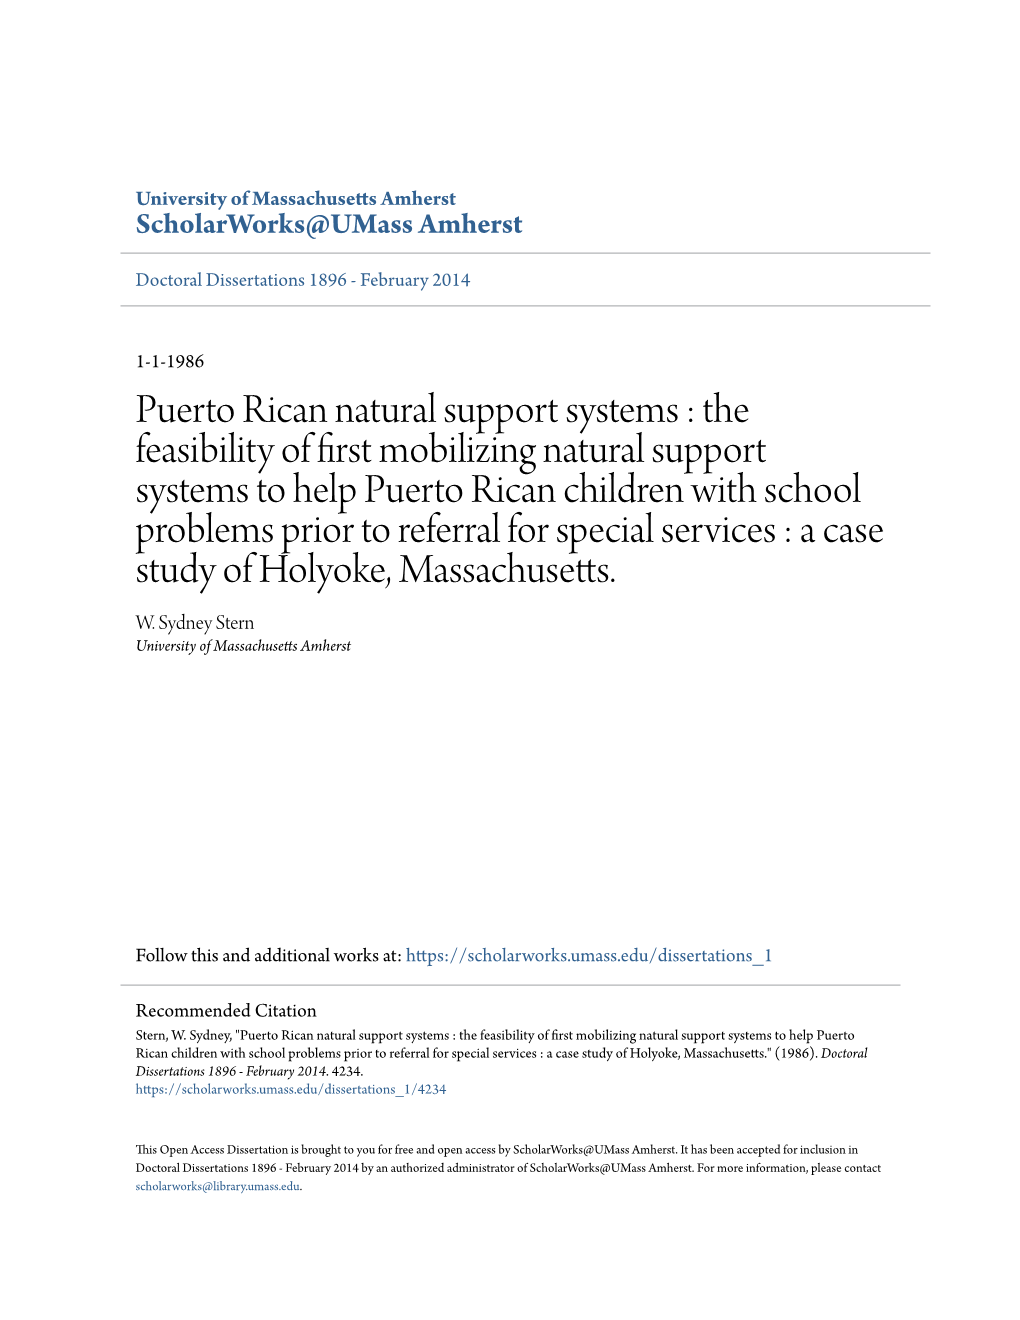 Puerto Rican Natural Support Systems